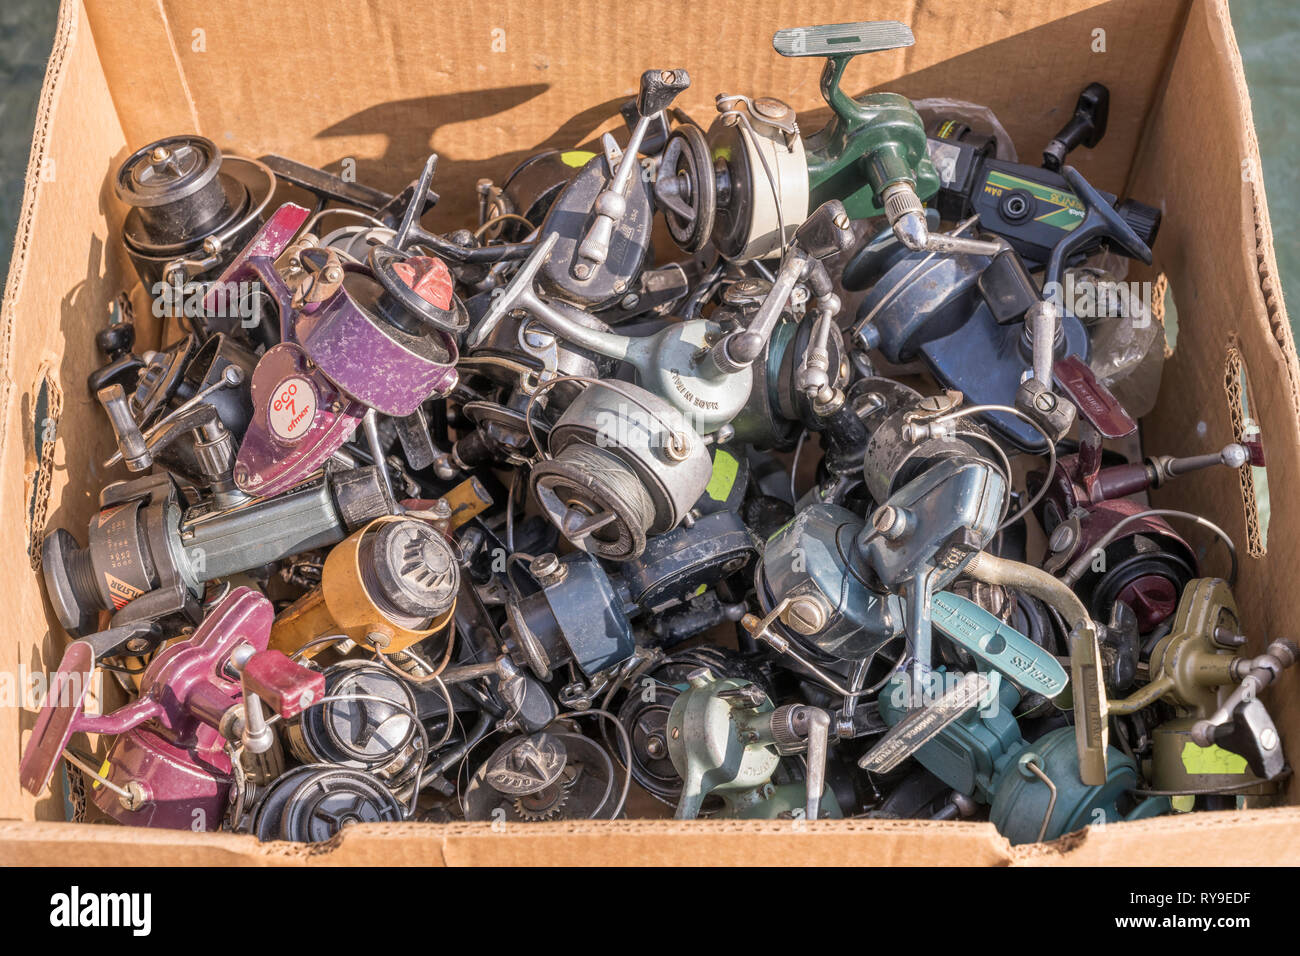 https://c8.alamy.com/comp/RY9EDF/cremona-italy-february-17-box-with-heap-of-old-fishing-reels-on-sale-at-street-market-shot-in-bright-winter-light-on-feb-17-2019-at-cremona-lom-RY9EDF.jpg